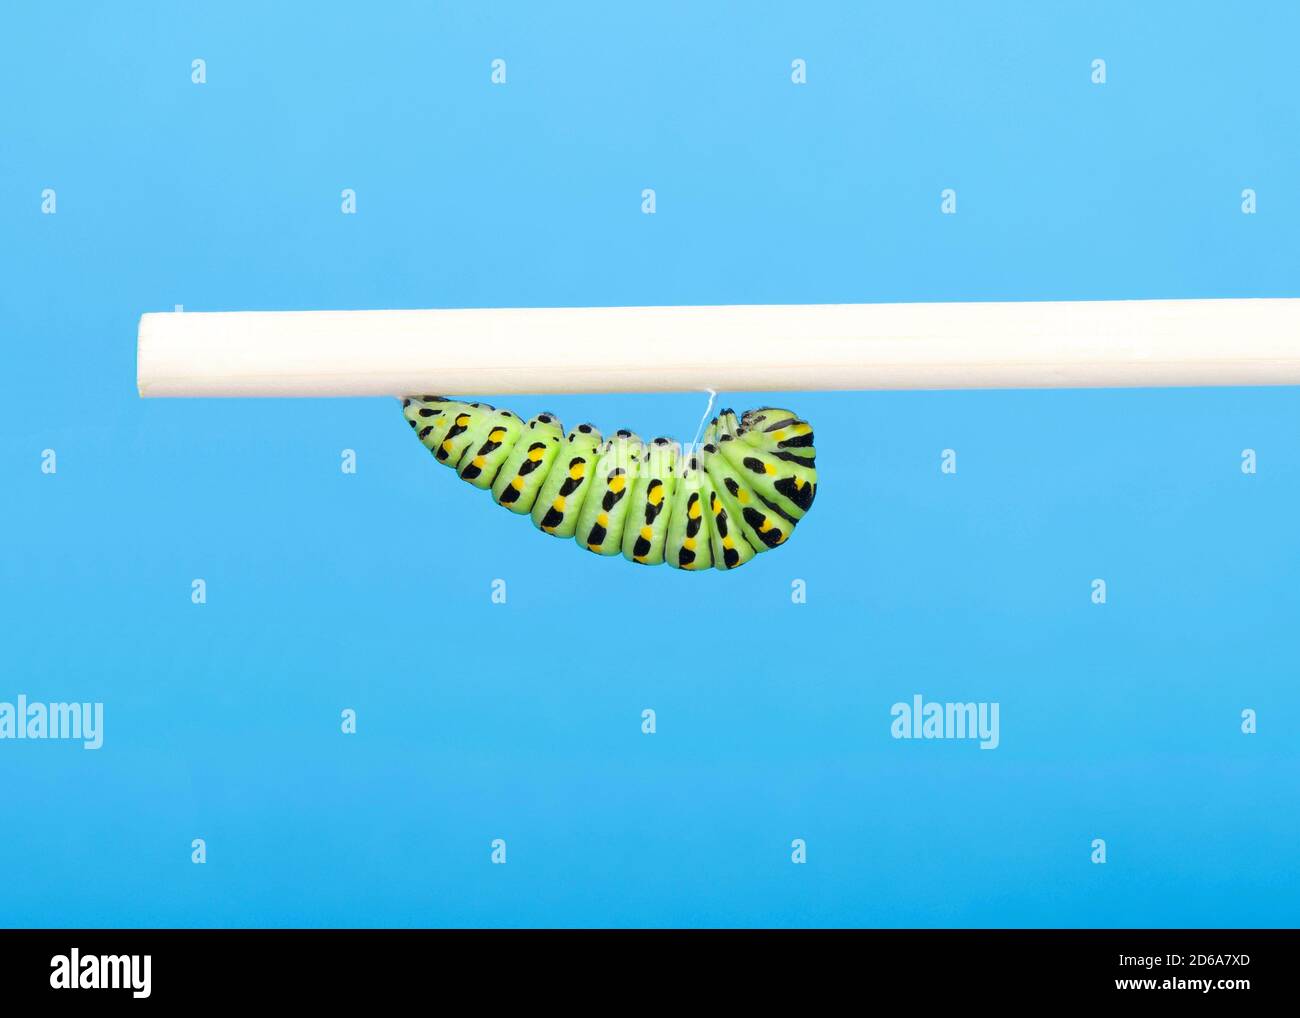 Black, green and yellow, Old World, or common yellow Swallowtail caterpillar,  attached to a wood dowel rod preparing to enclose in a chrysalis. Blue Stock Photo